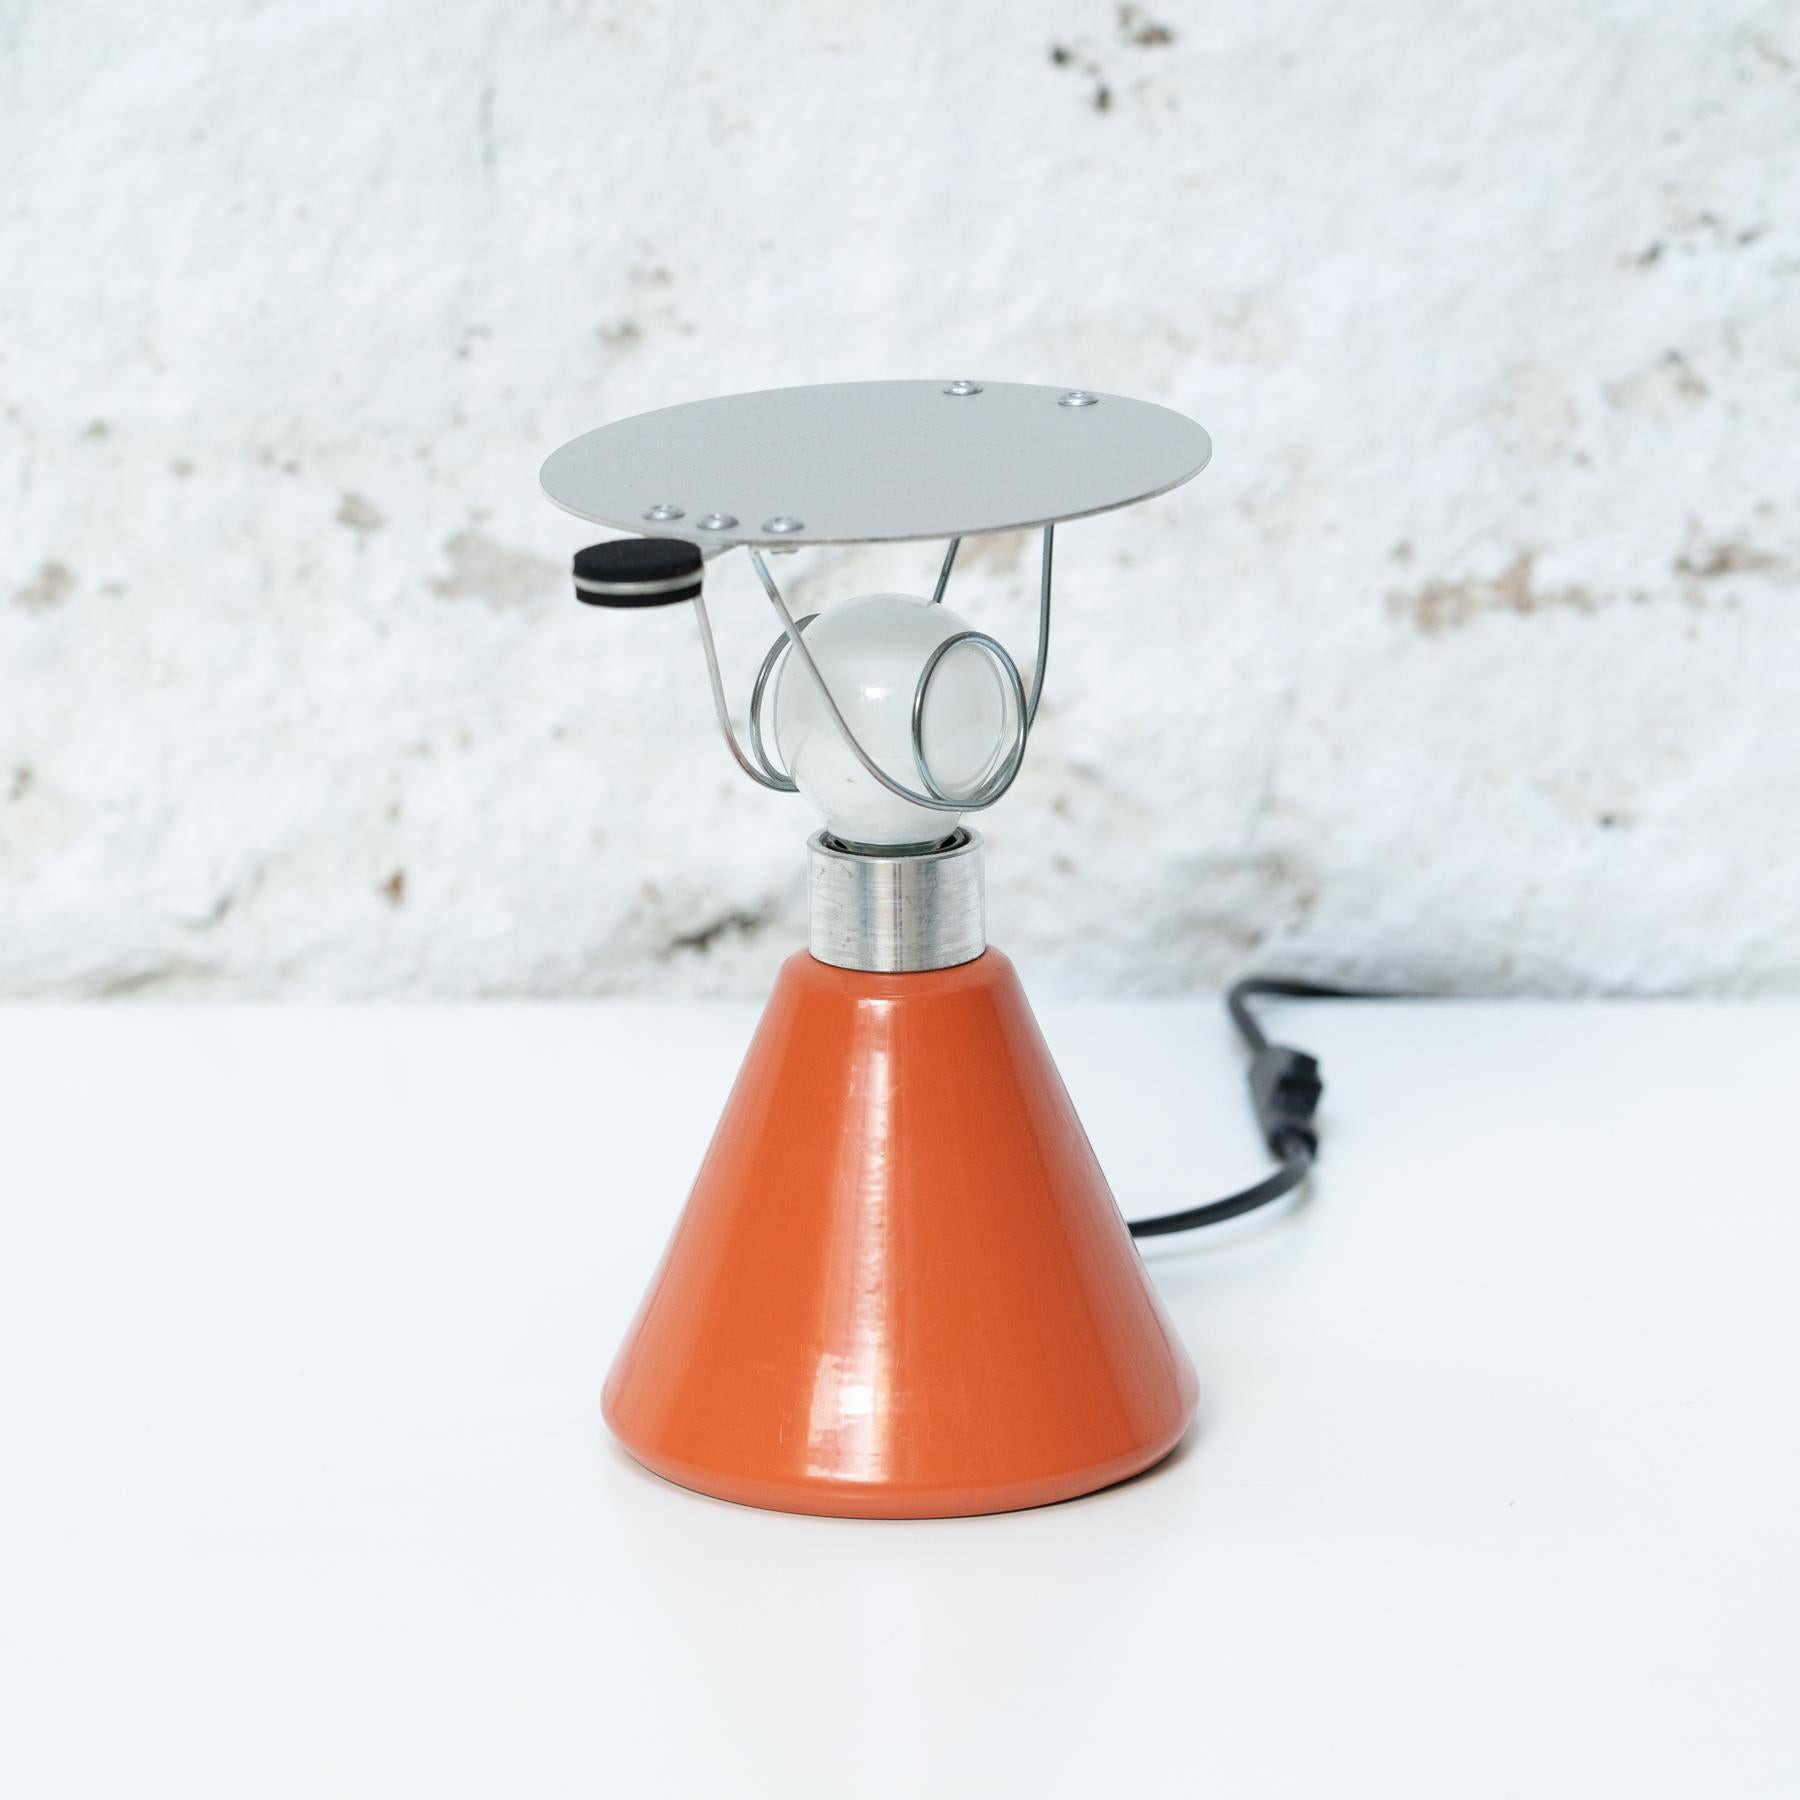 Mid-Century Modern Table Lamp Aluminor In Lacquered Metal, circa 1980 For Sale